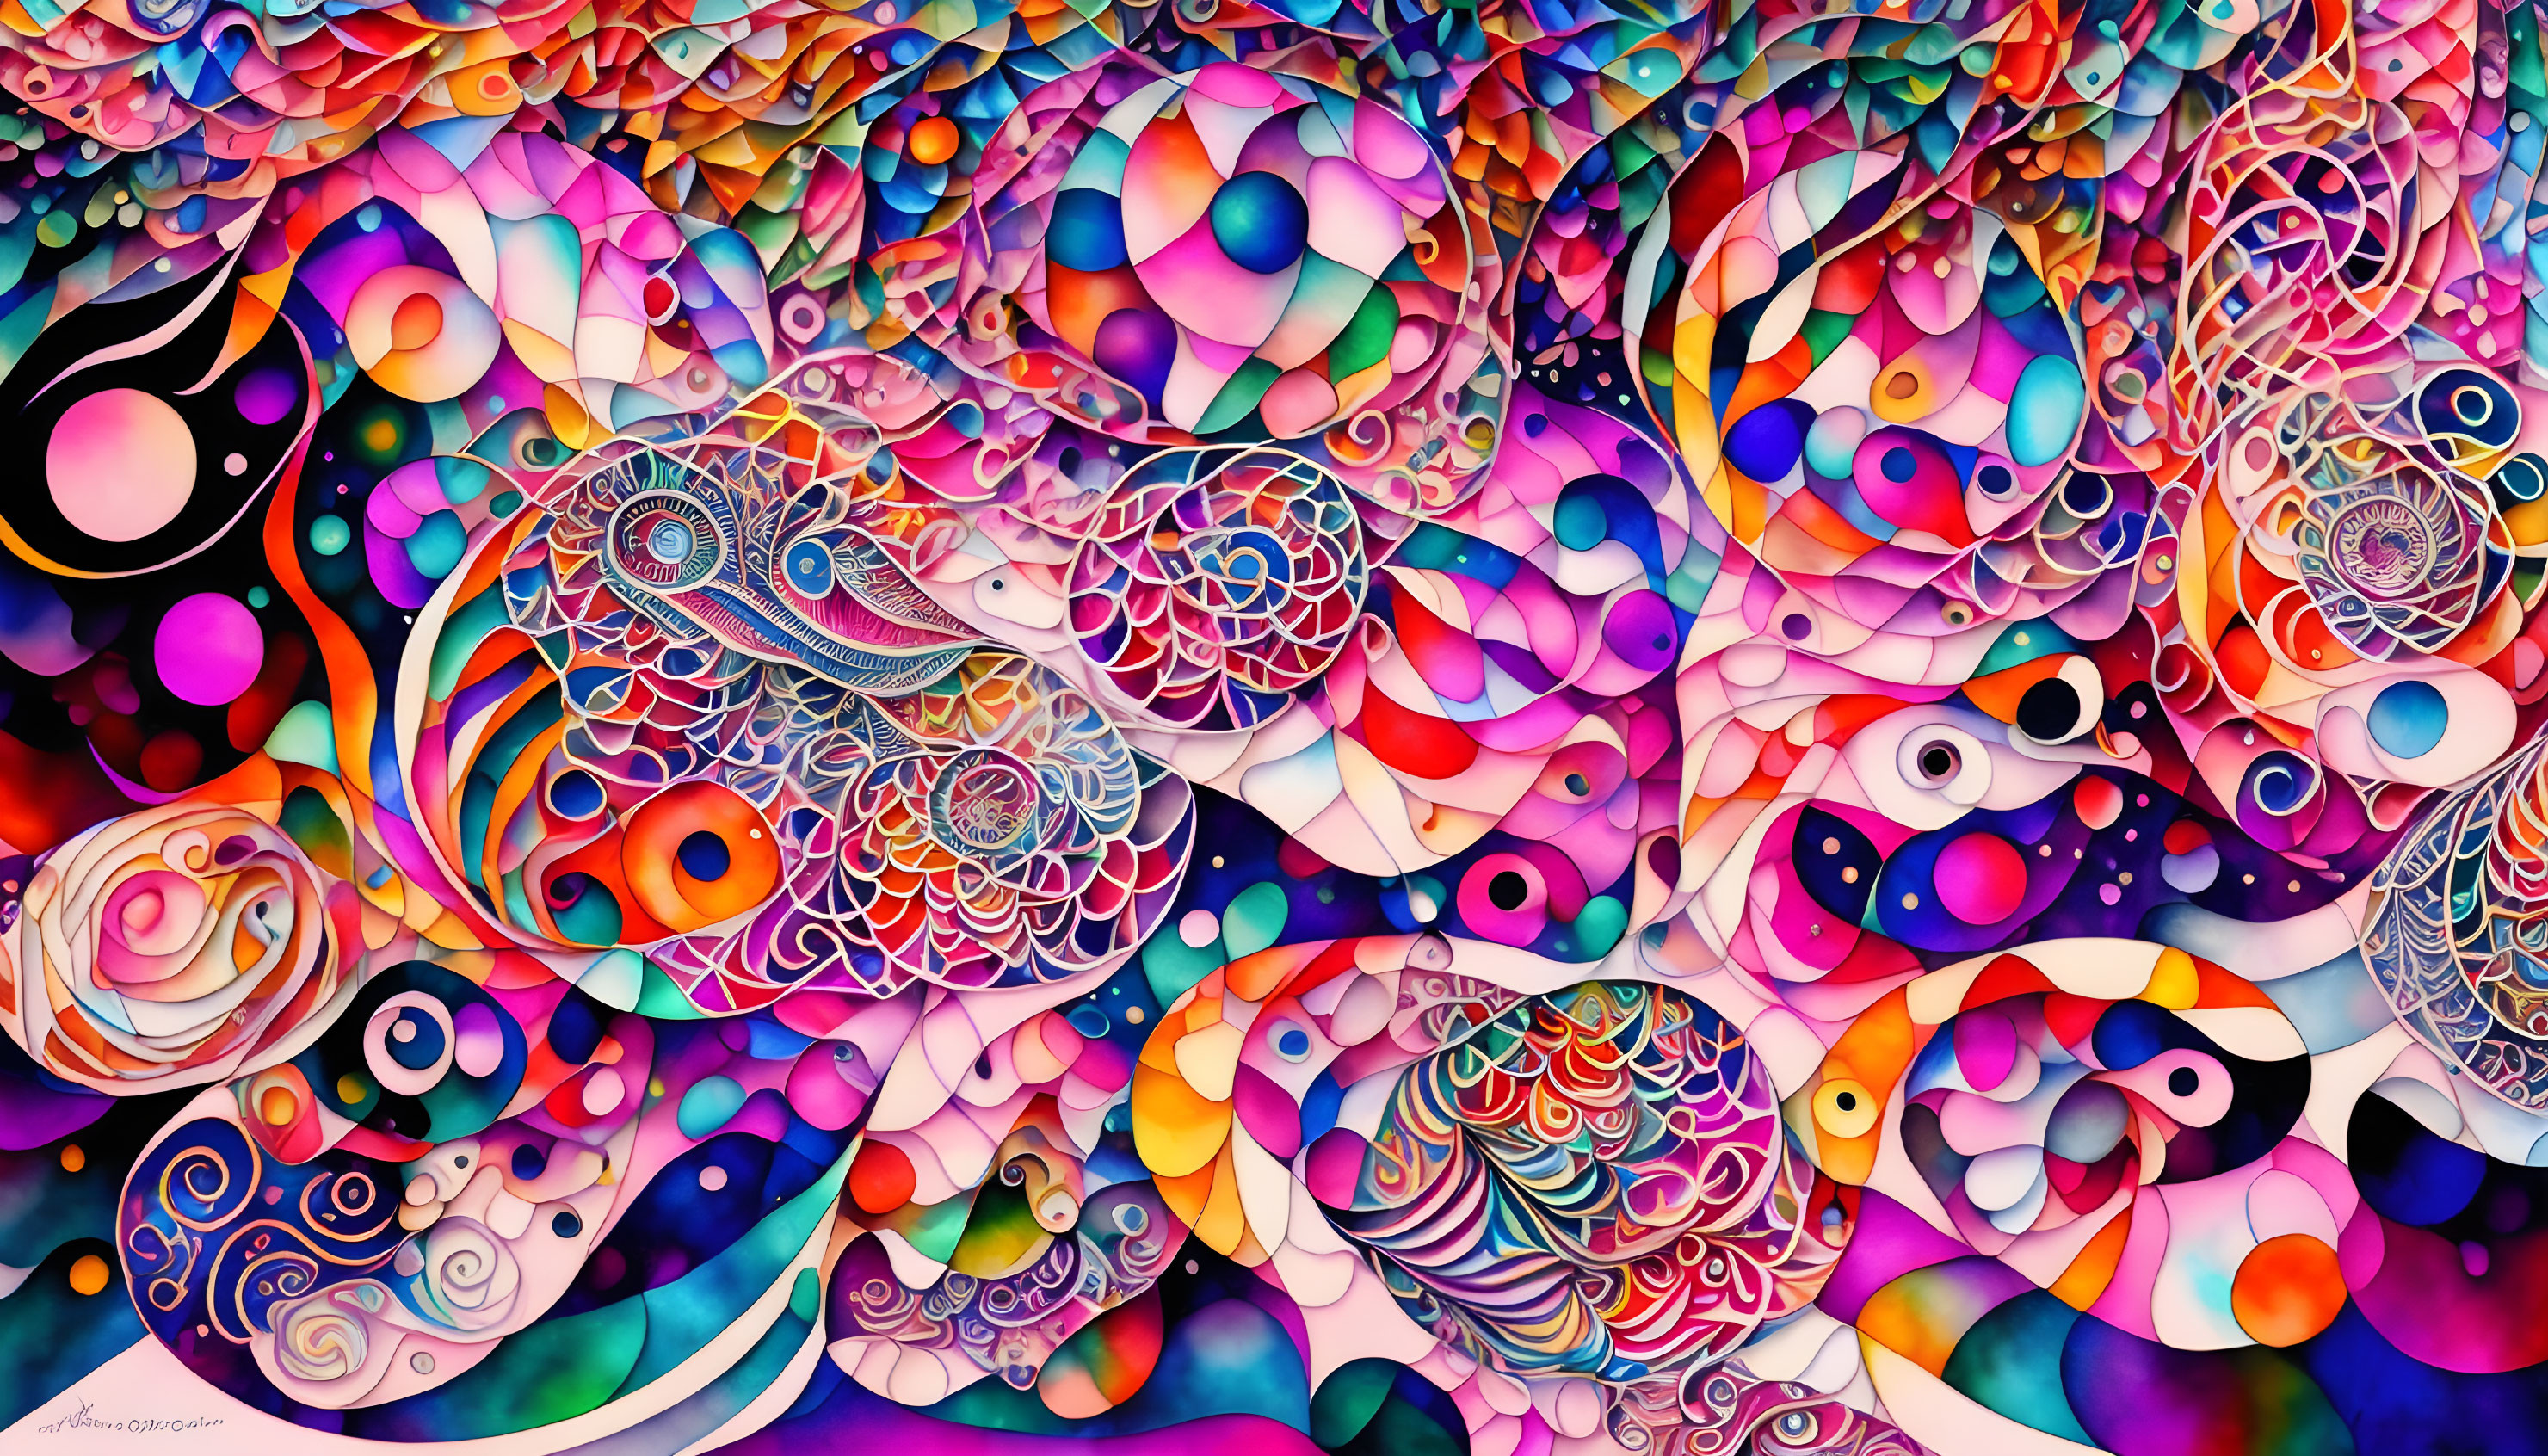 Colorful Abstract Artwork with Swirling Patterns and Circles